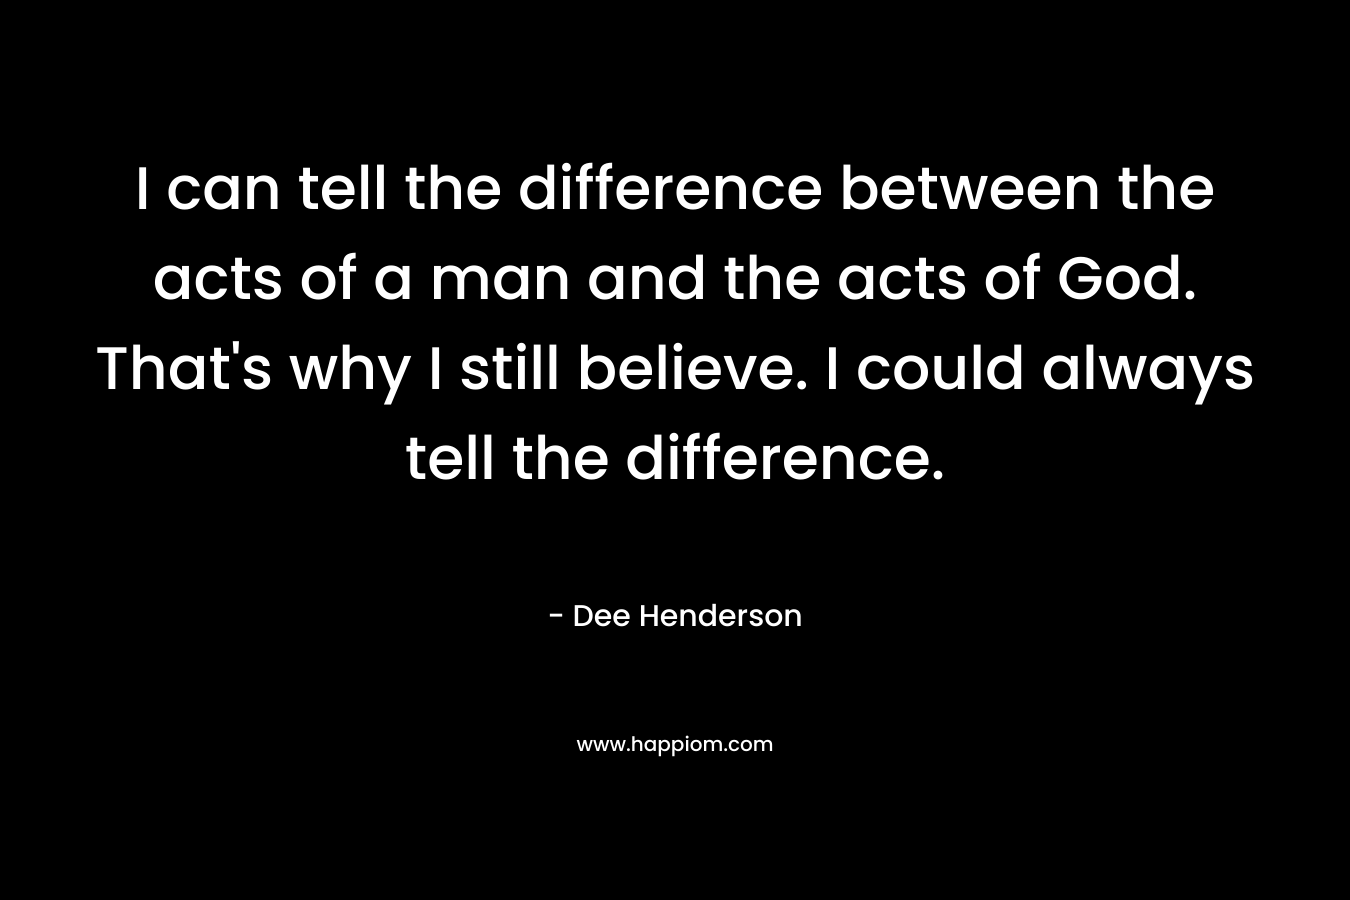 I can tell the difference between the acts of a man and the acts of God. That's why I still believe. I could always tell the difference.